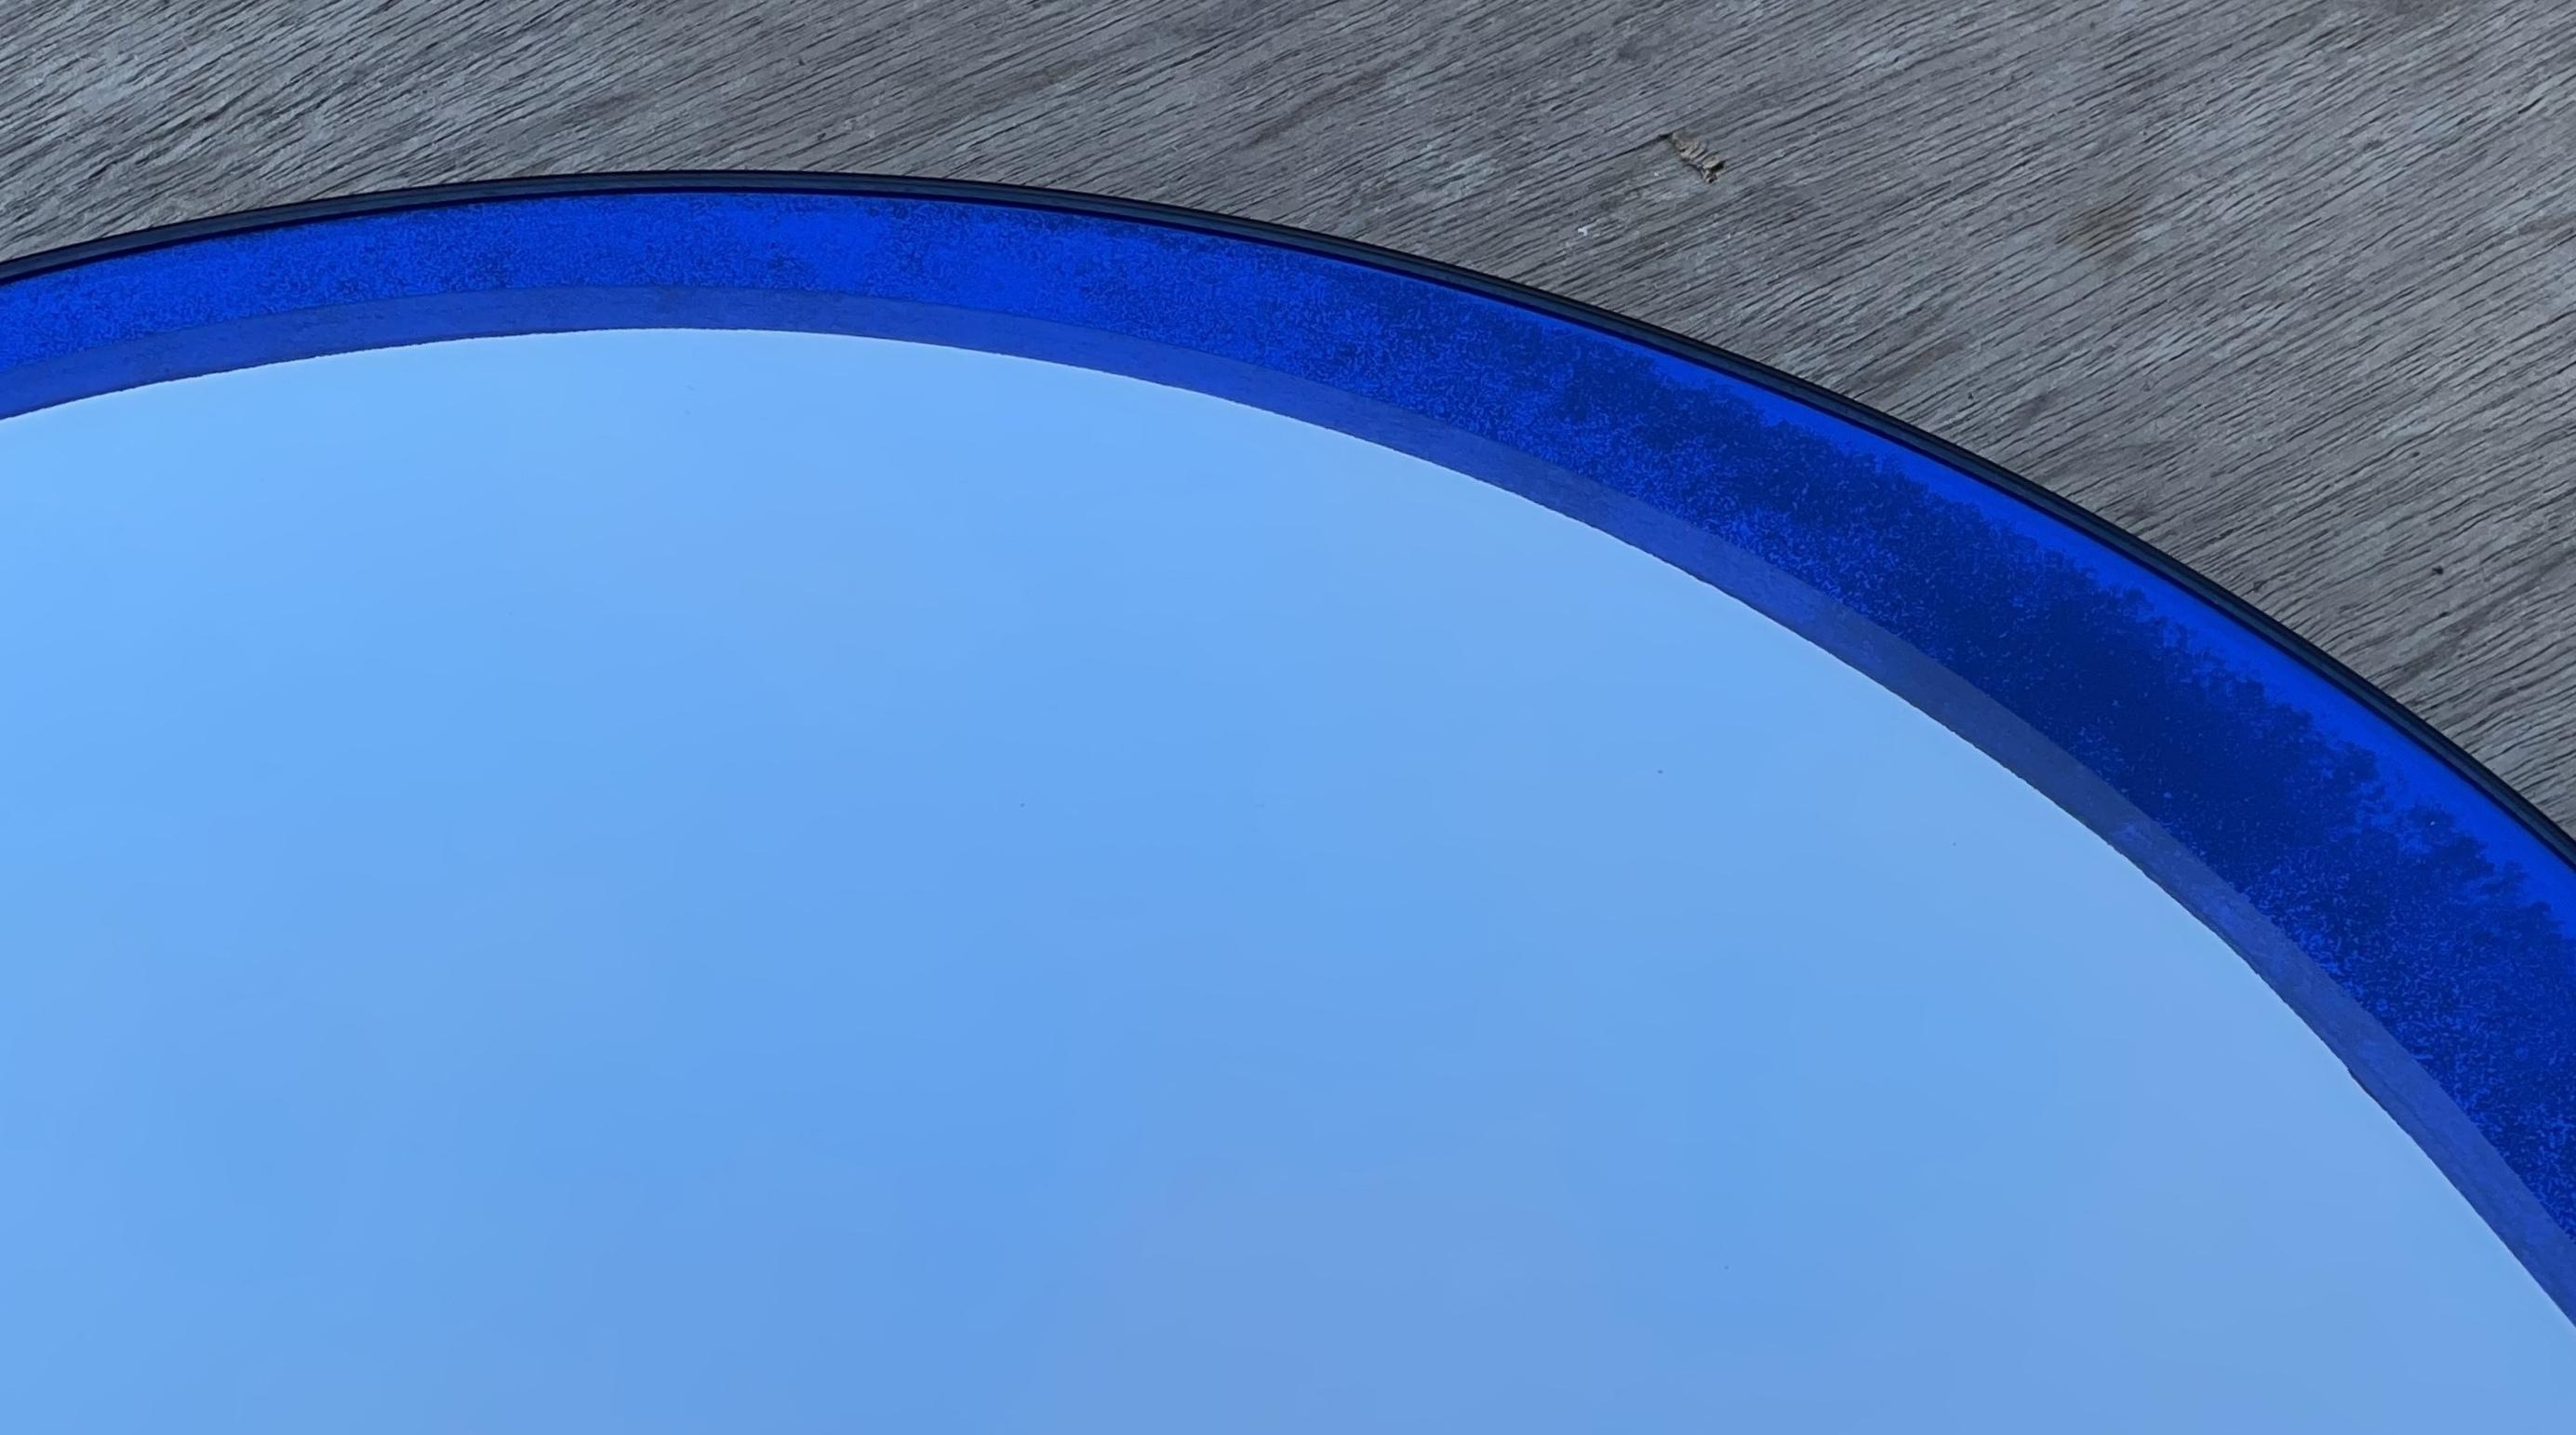 Designer 1970s Veca Made in Italy Mid-Century Modern Wall Cobalt Blue Mirror For Sale 2